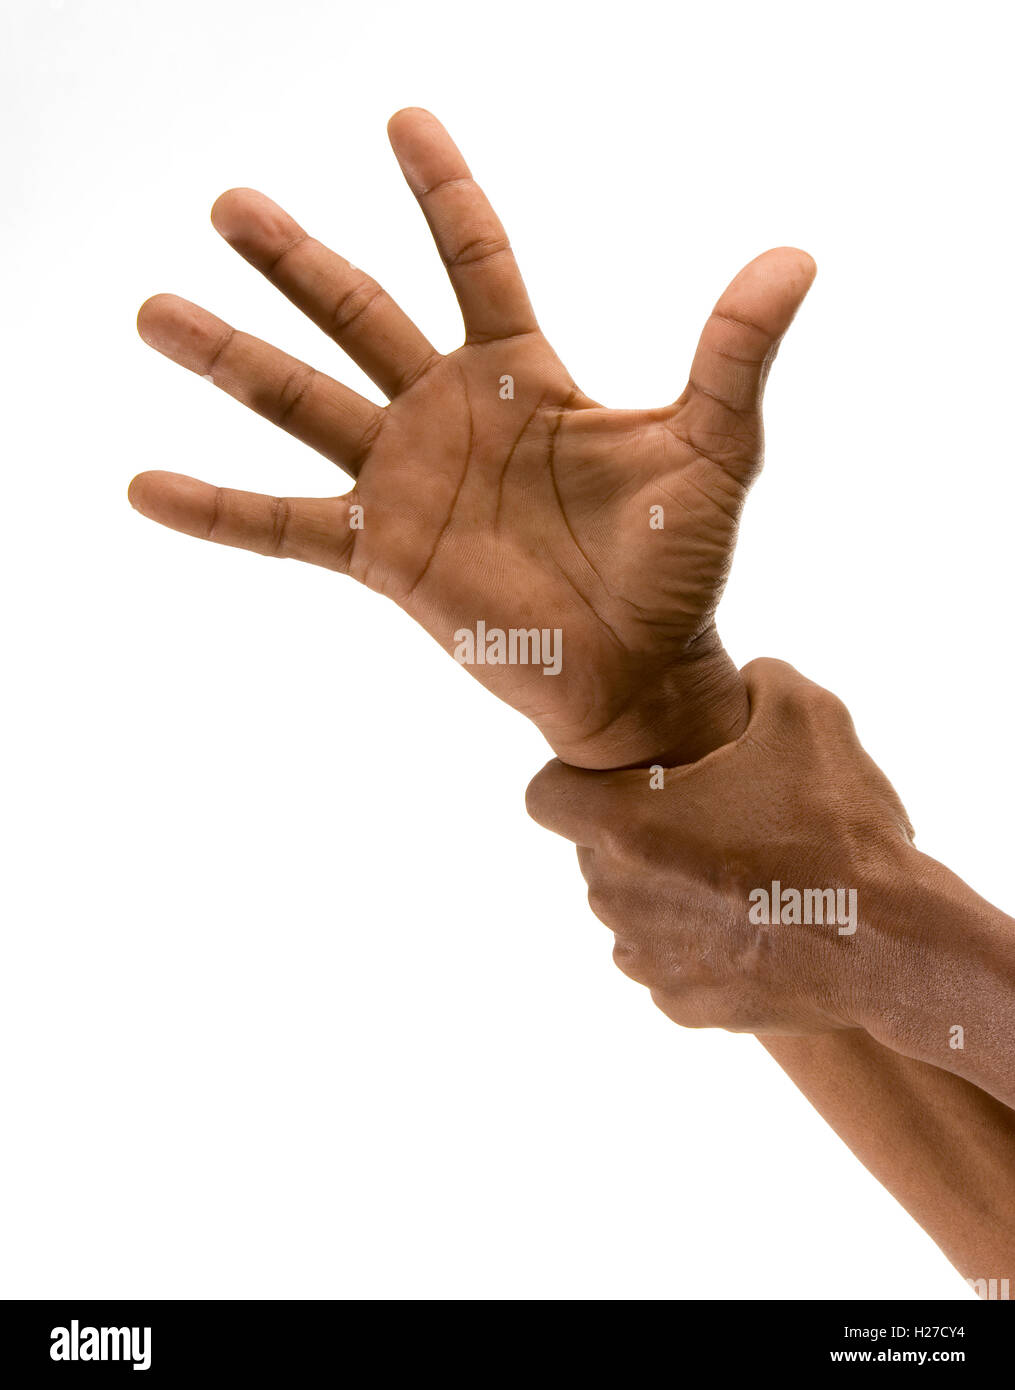 Protest and restraint. African's outstretched hand being gripped at the wrist by another hand. Stock Photo